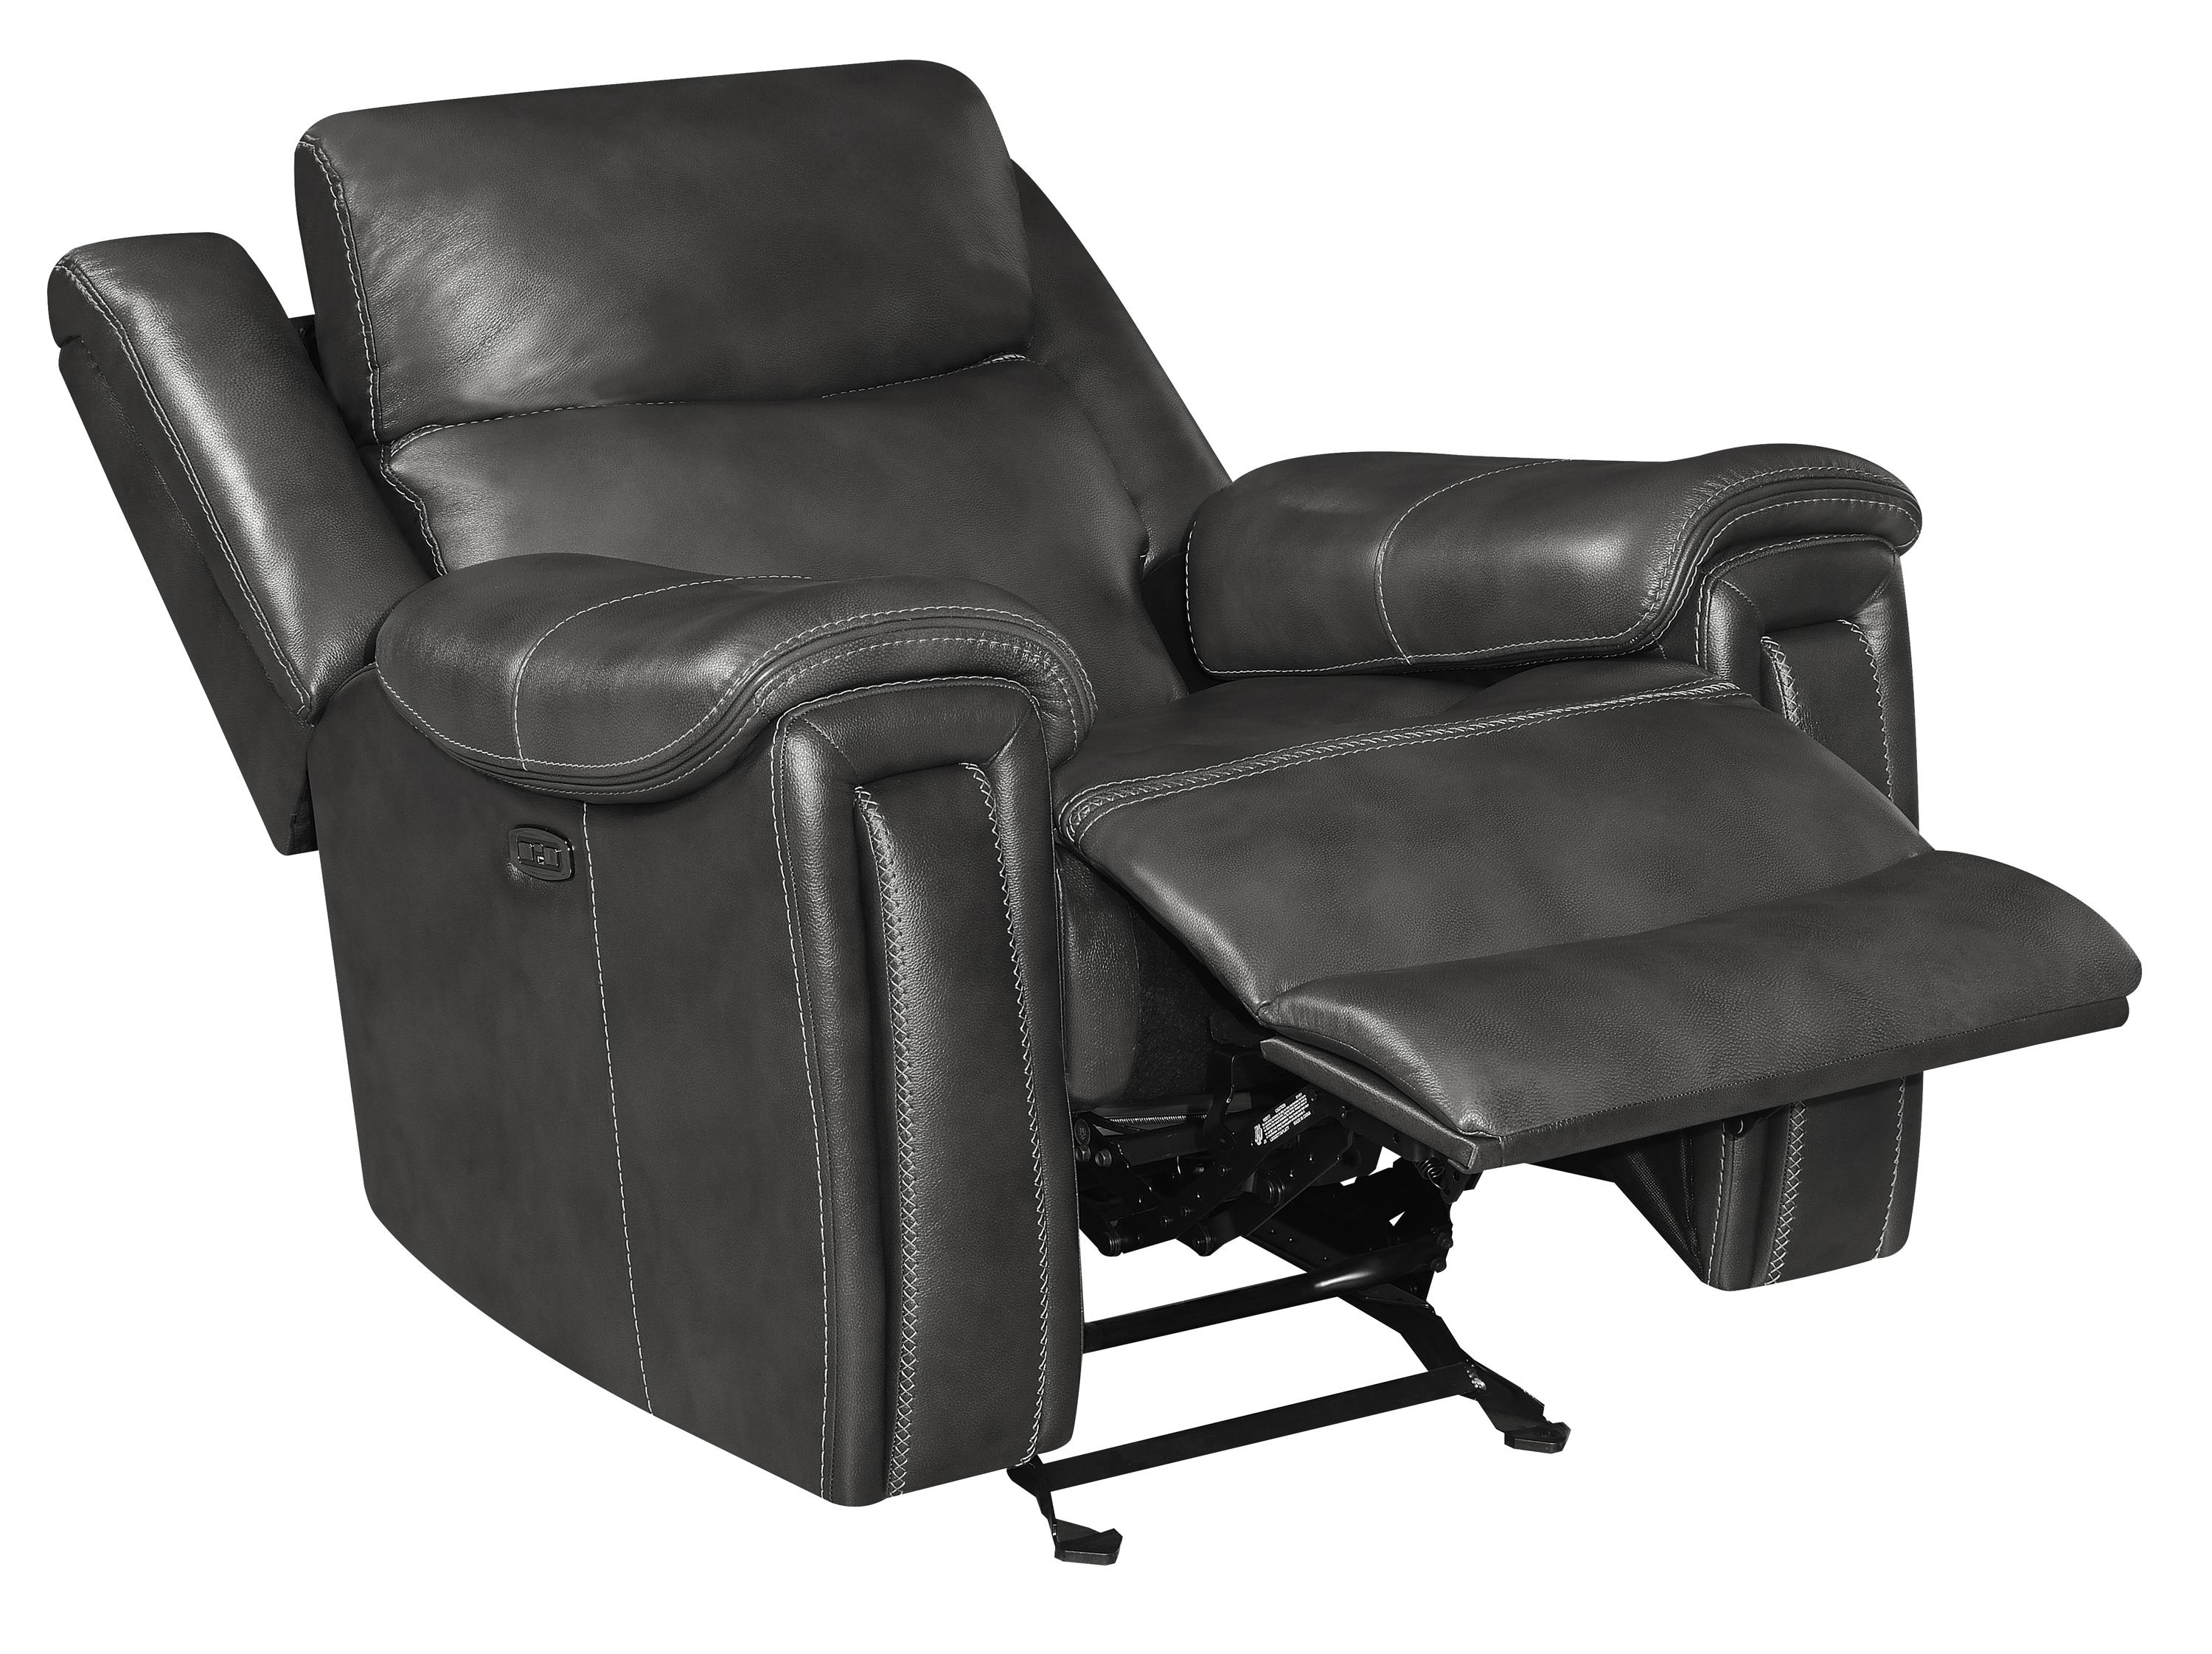 

    
Coaster 609323PP Shallowford Power glider recliner Charcoal 609323PP
